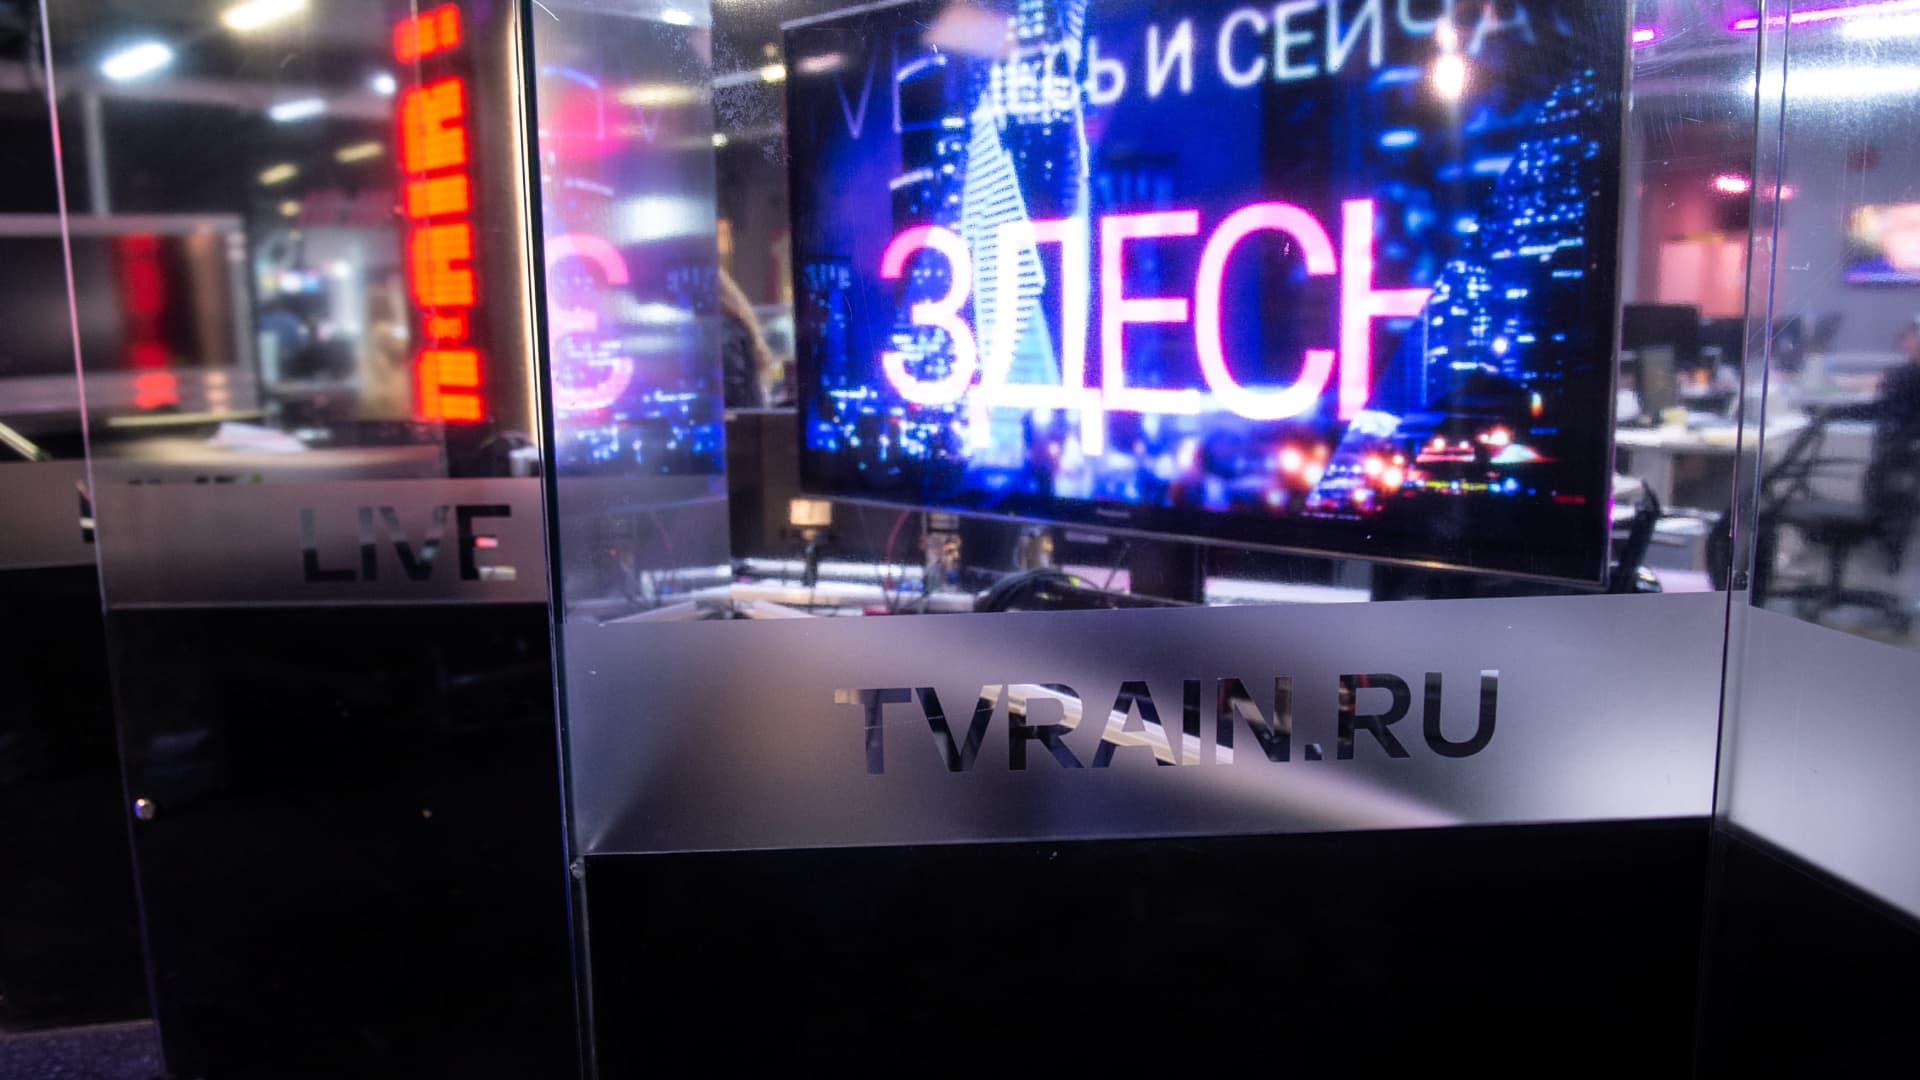 A view of the TV Rain (Dozhd) online news channel studio in Moscow, Russia August 20, 2021.